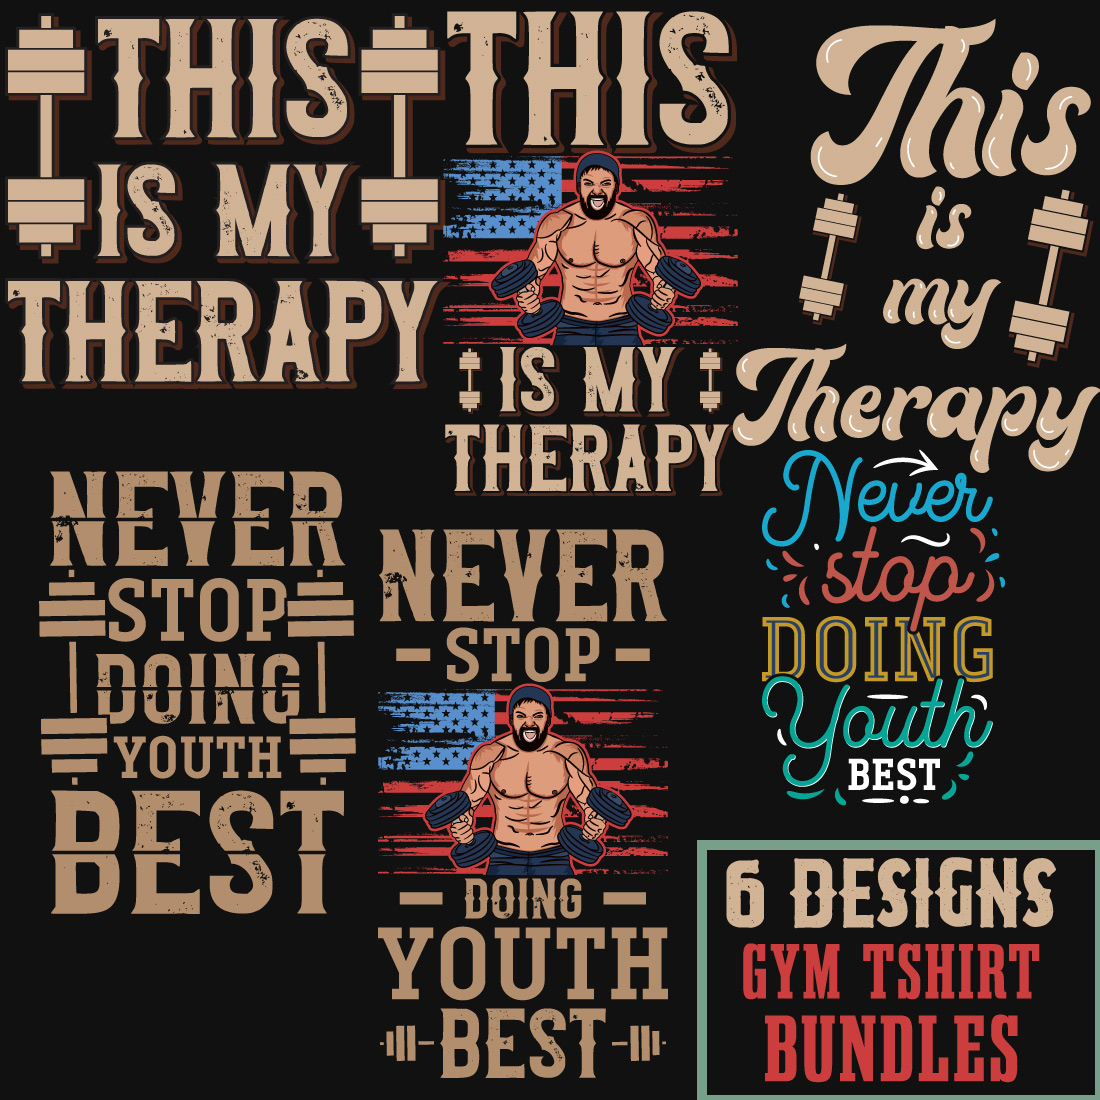 6 Best Gym Or Fitness T-Shirt Design Bundle main cover